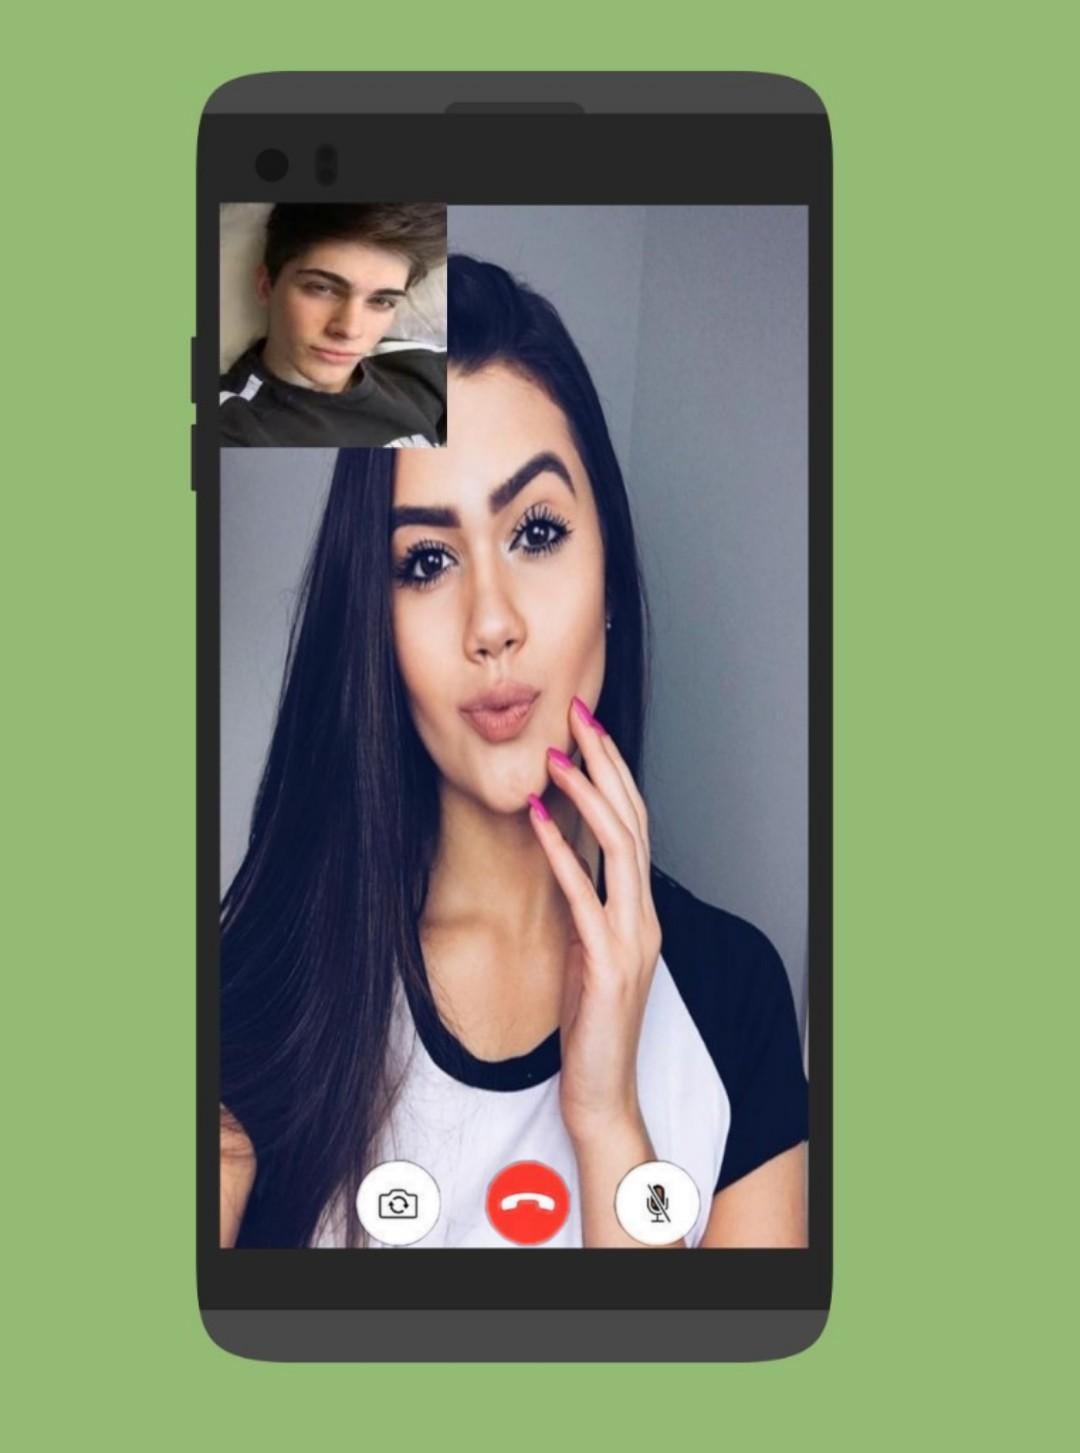 Free Dating : Online Video Chat & Calling for Android - APK Download